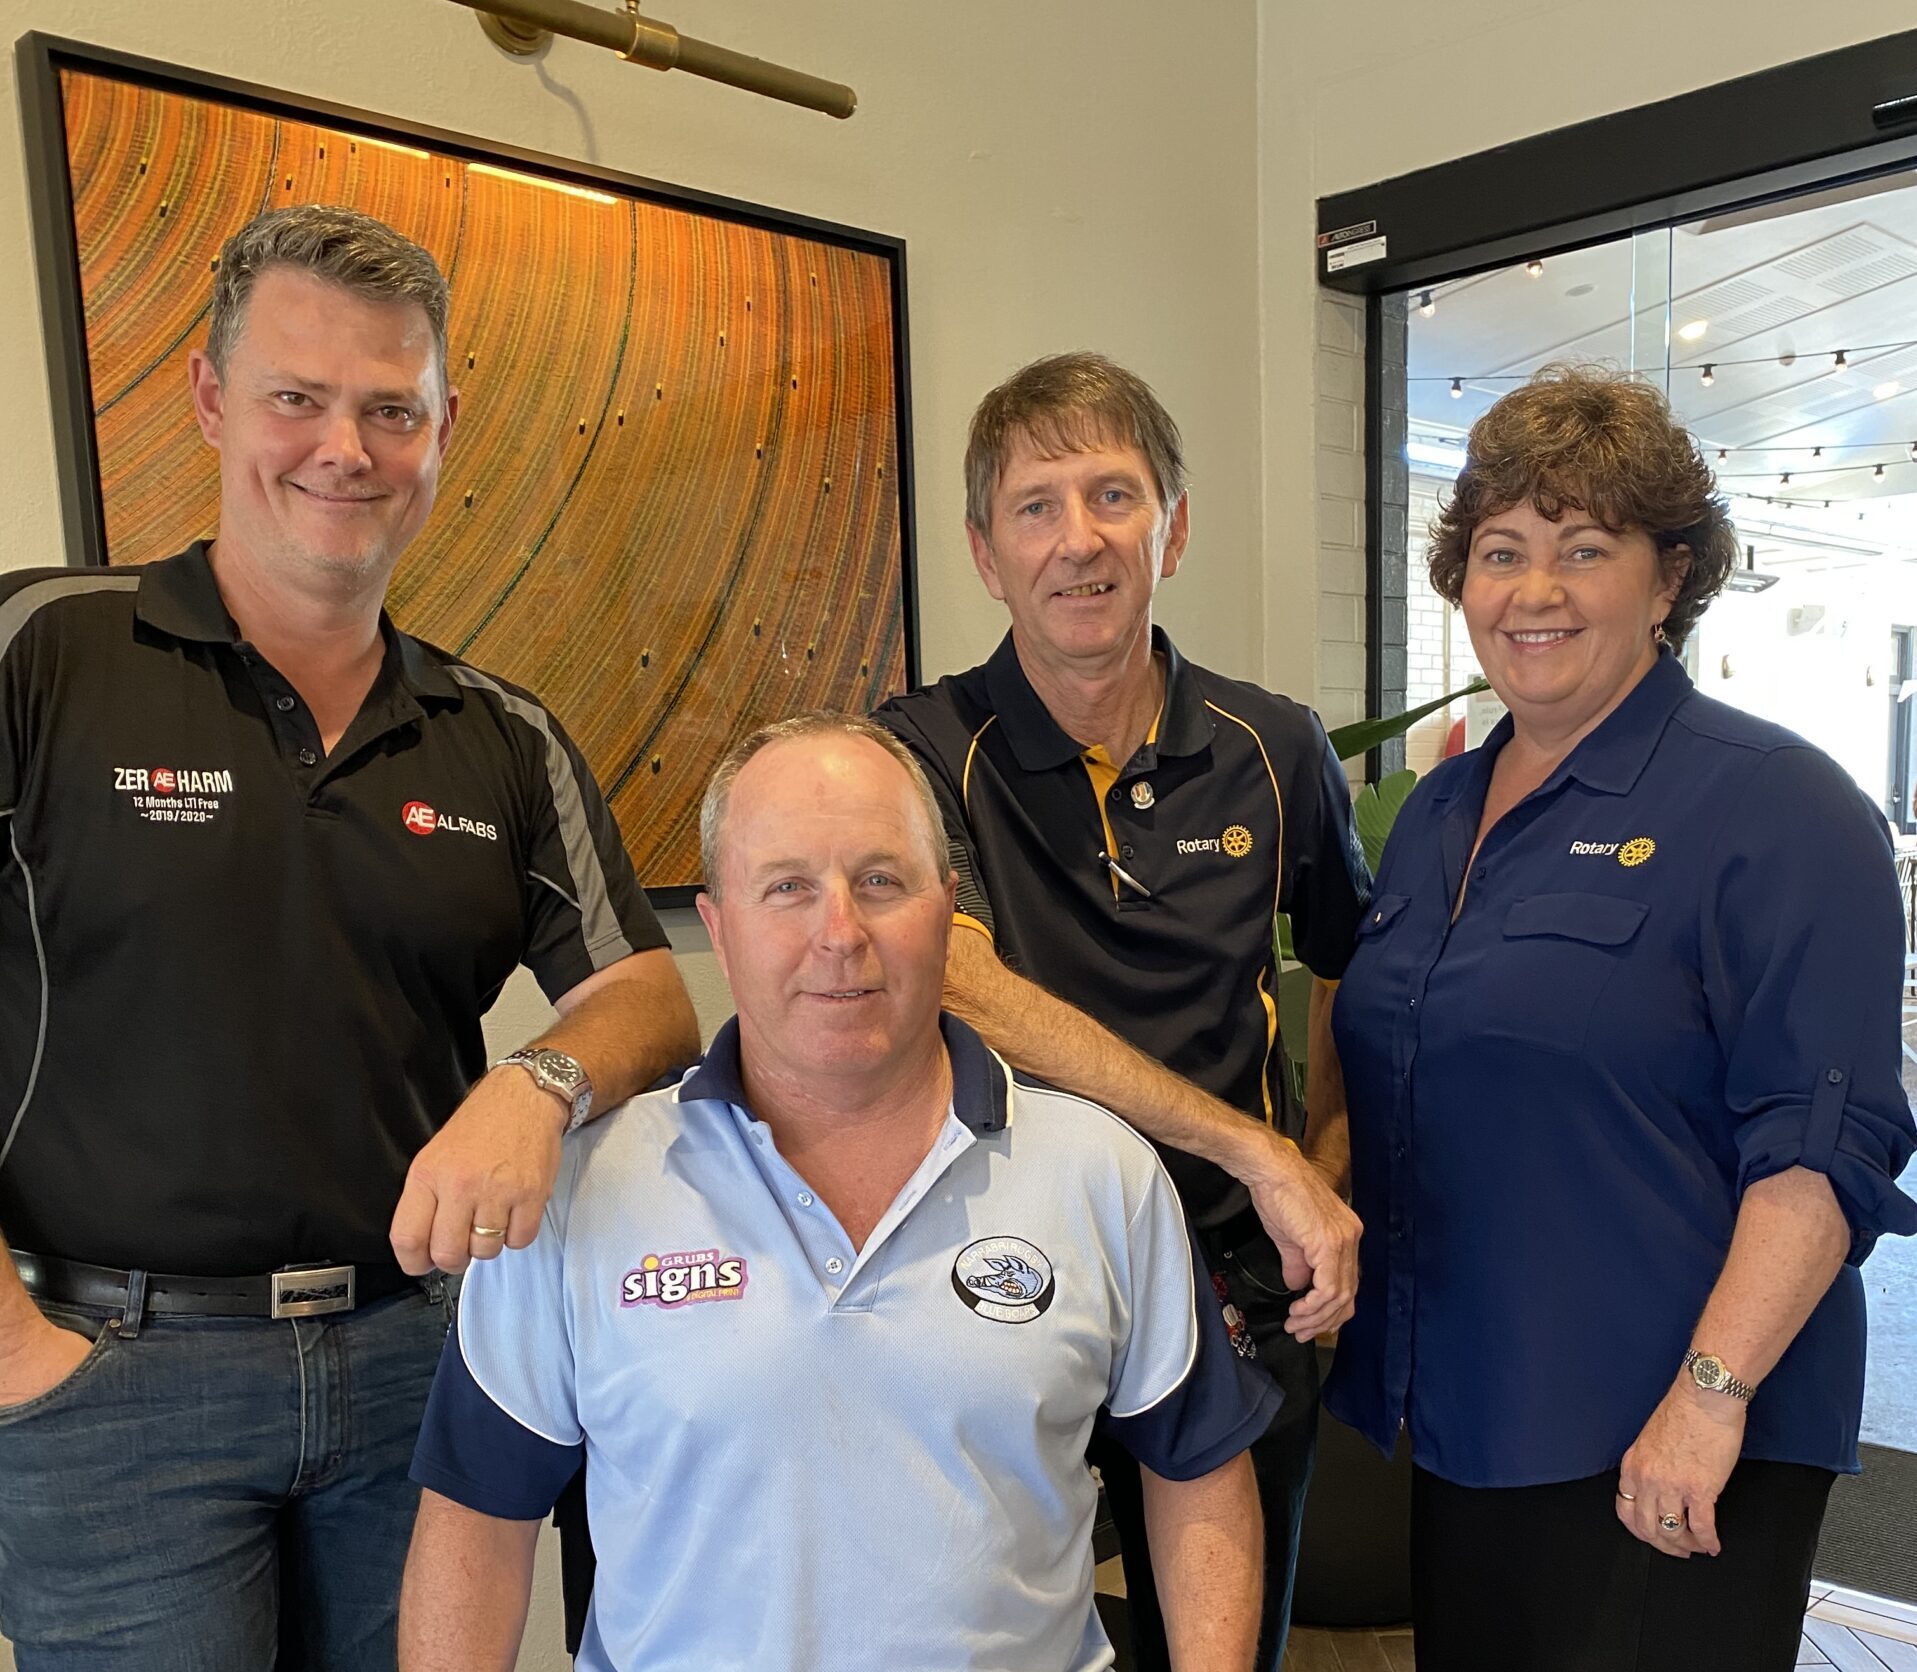 Grand opening for new Narrabri business – and a fundraiser for Brett Nolan